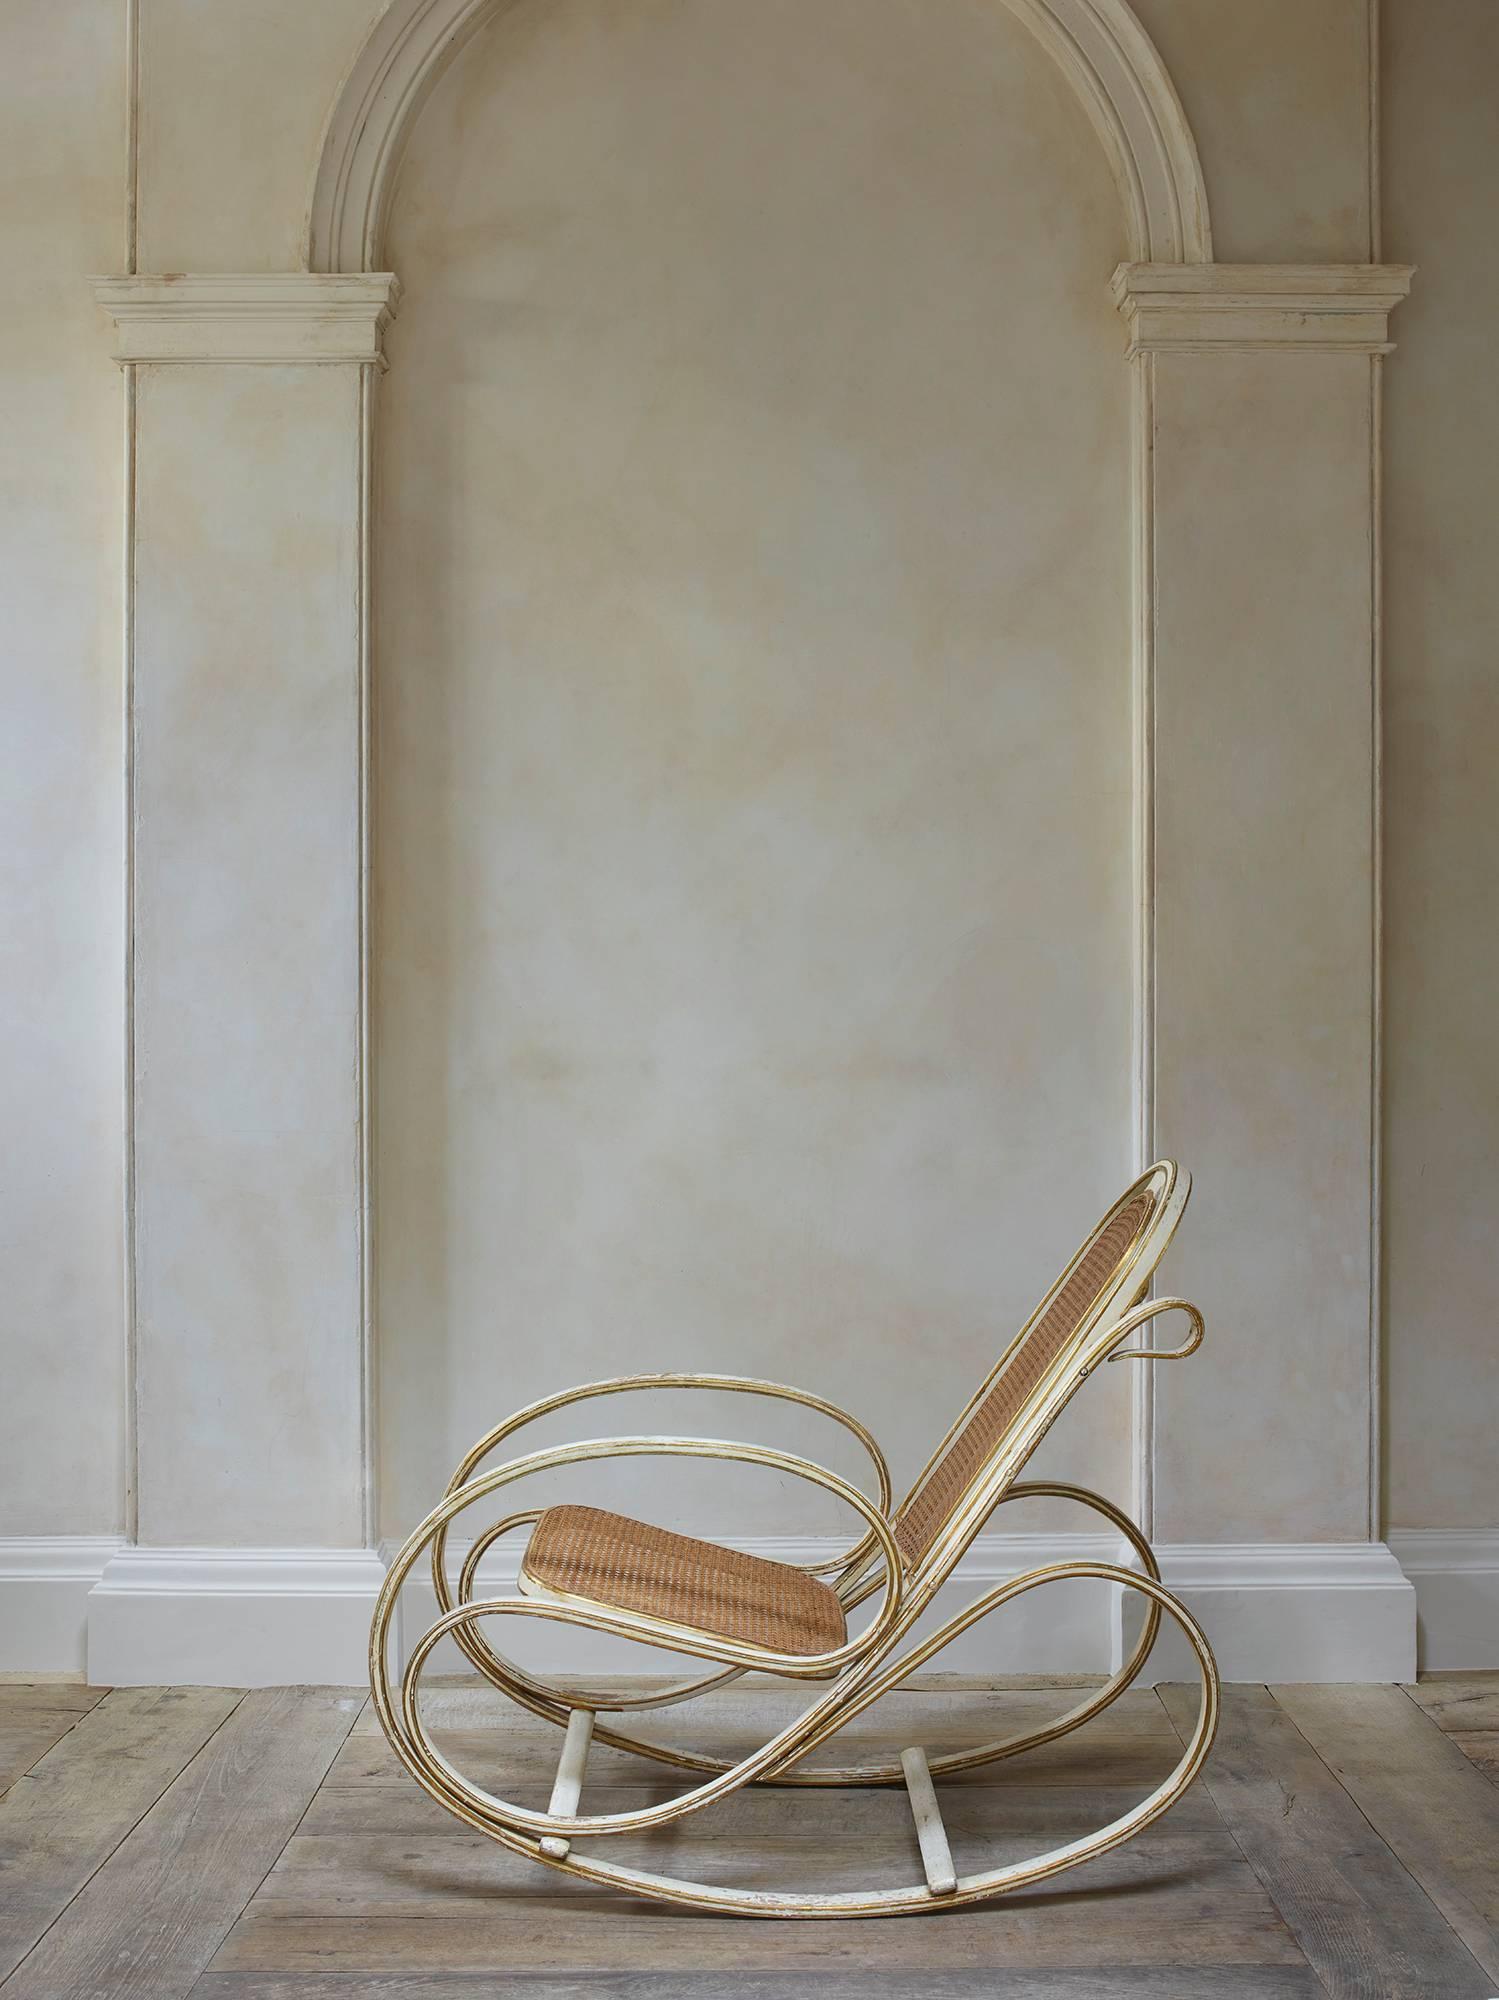 Model no. 269.

Retaining its original lacquered and gilt surface. Steam-bent beech with caned seat and back, each side composed of a single continuous molded member in a series of complex curves.

Manufactured by Societa Anonima Antonio